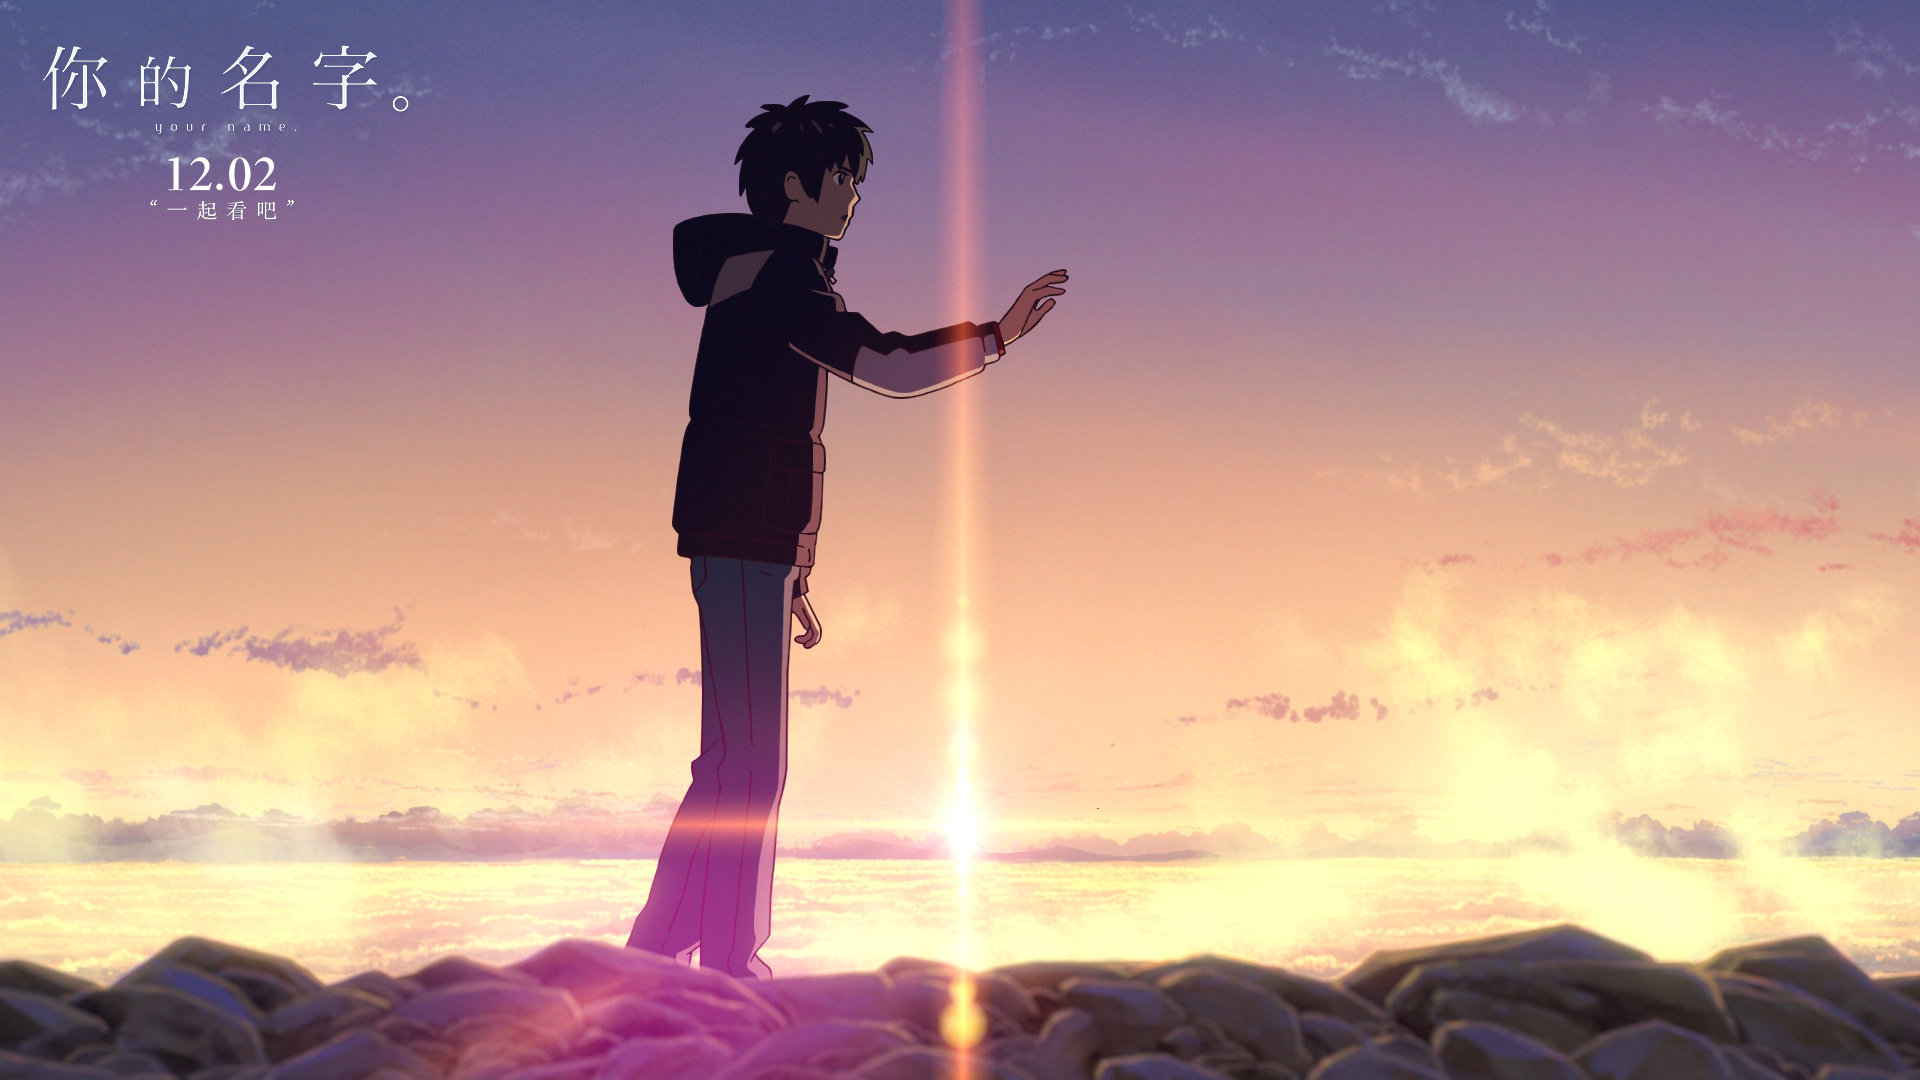 Awesome Your Name Free Wallpaper Id - Your Name Wallpaper 1080p - HD Wallpaper 